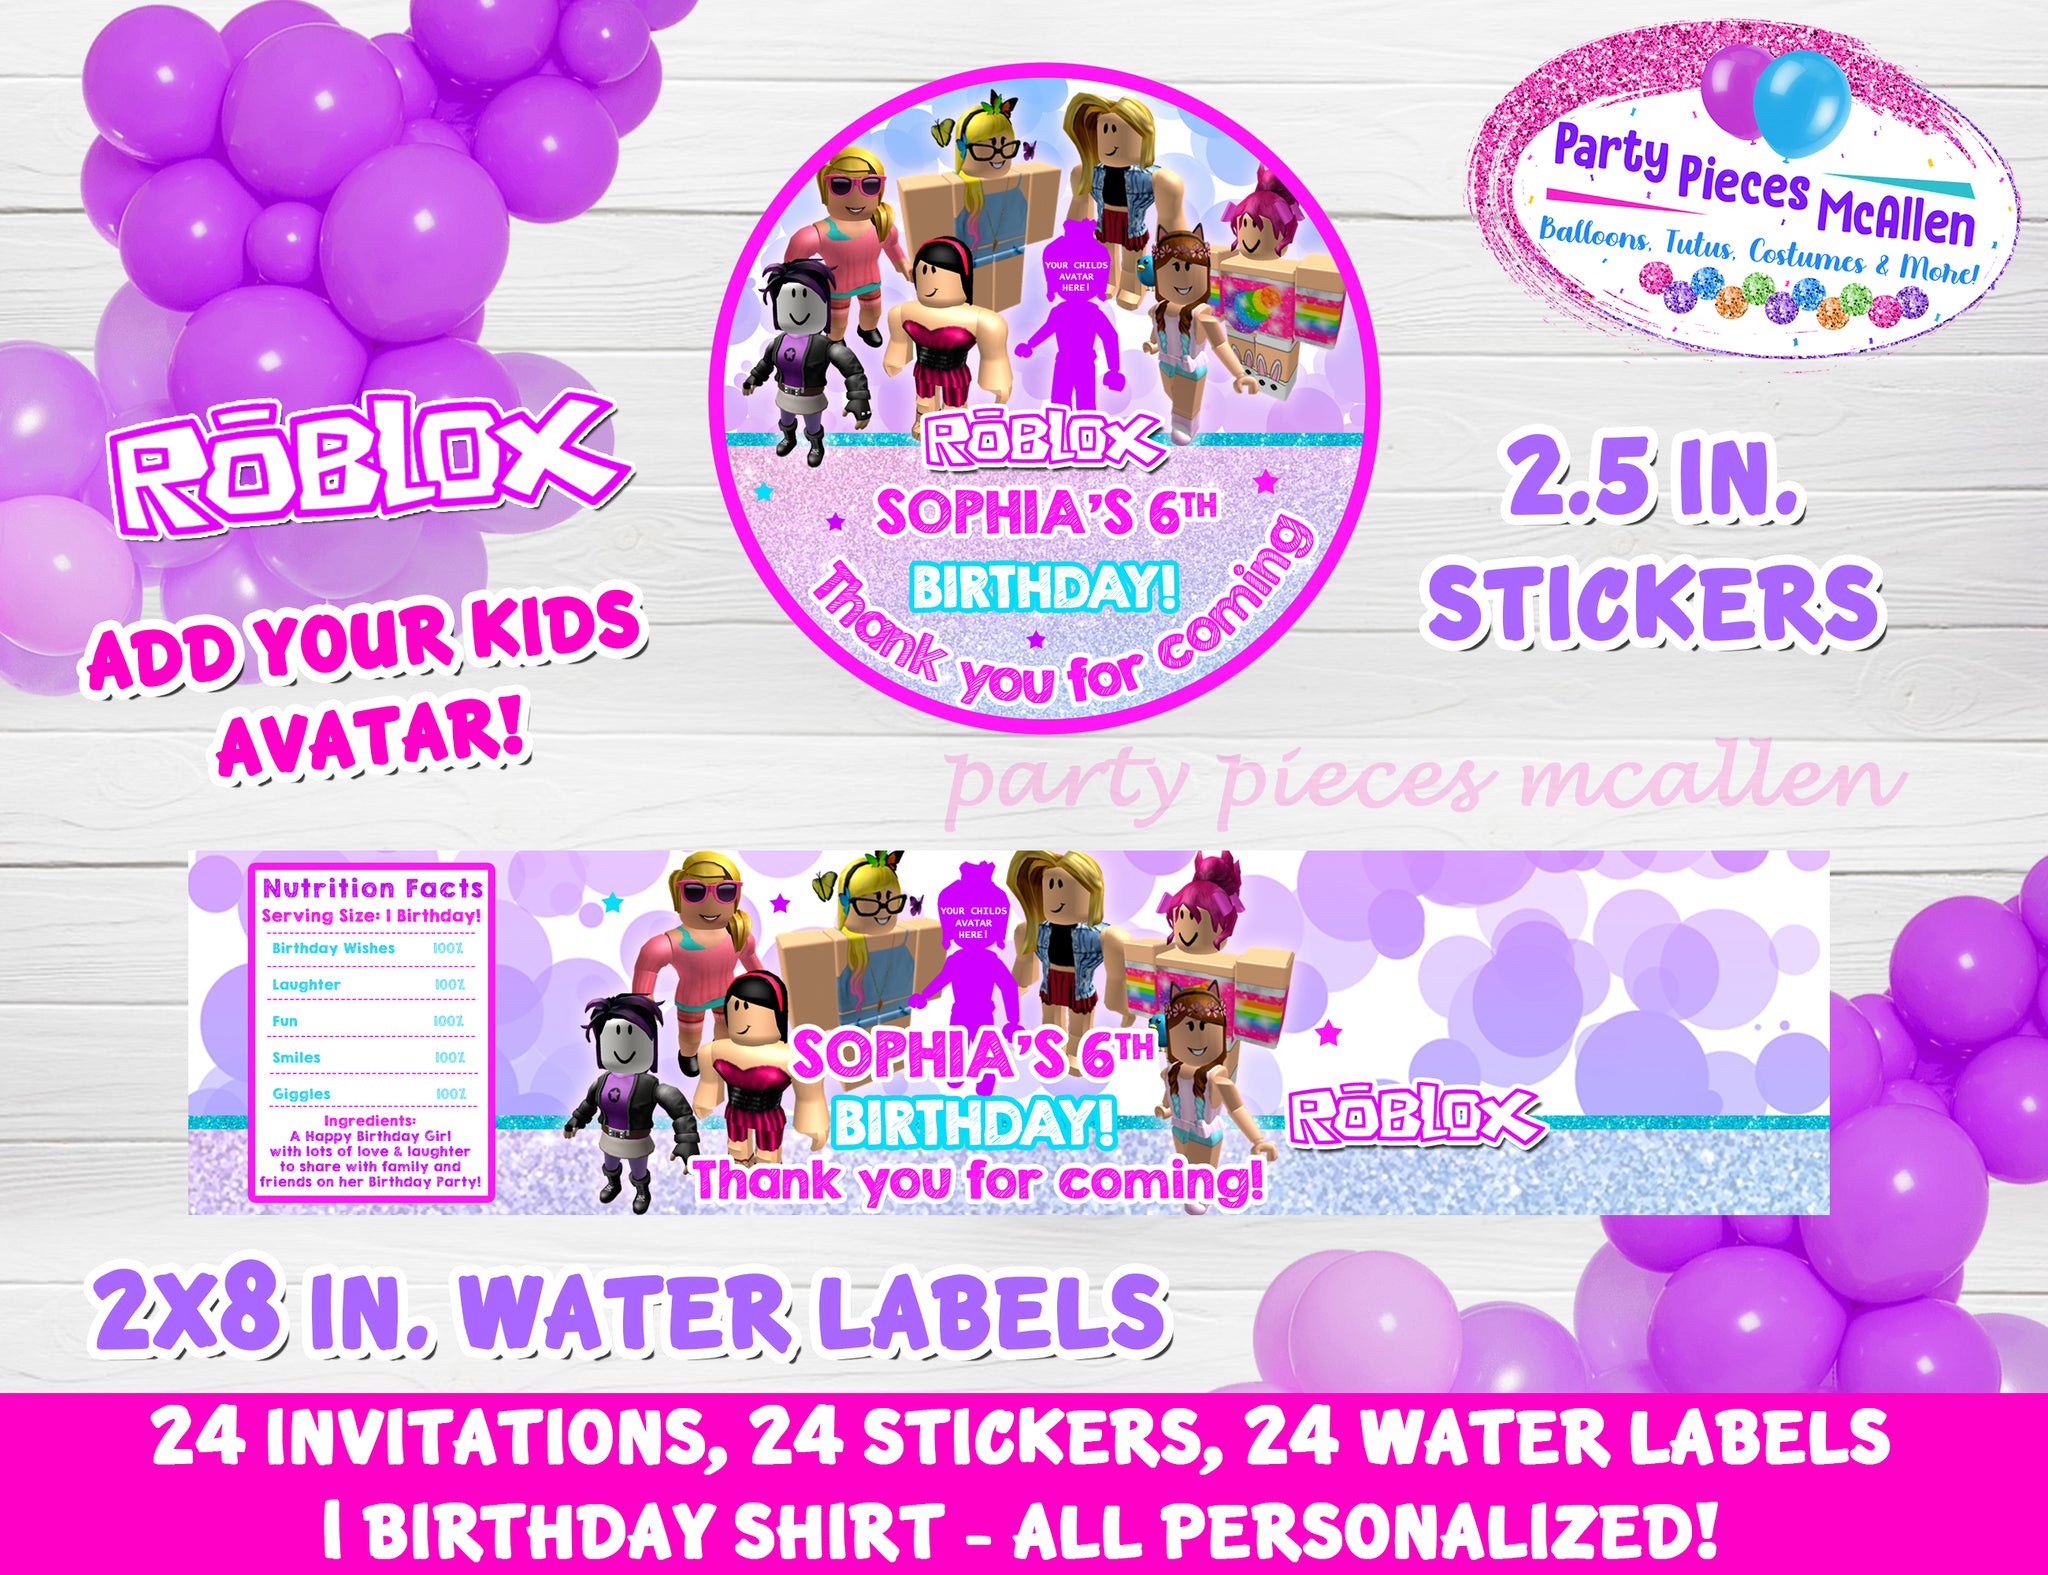 Roblox Girl Party Package With Custom Avatar Party Pieces Mcallen - roblox girls party party pieces mcallen